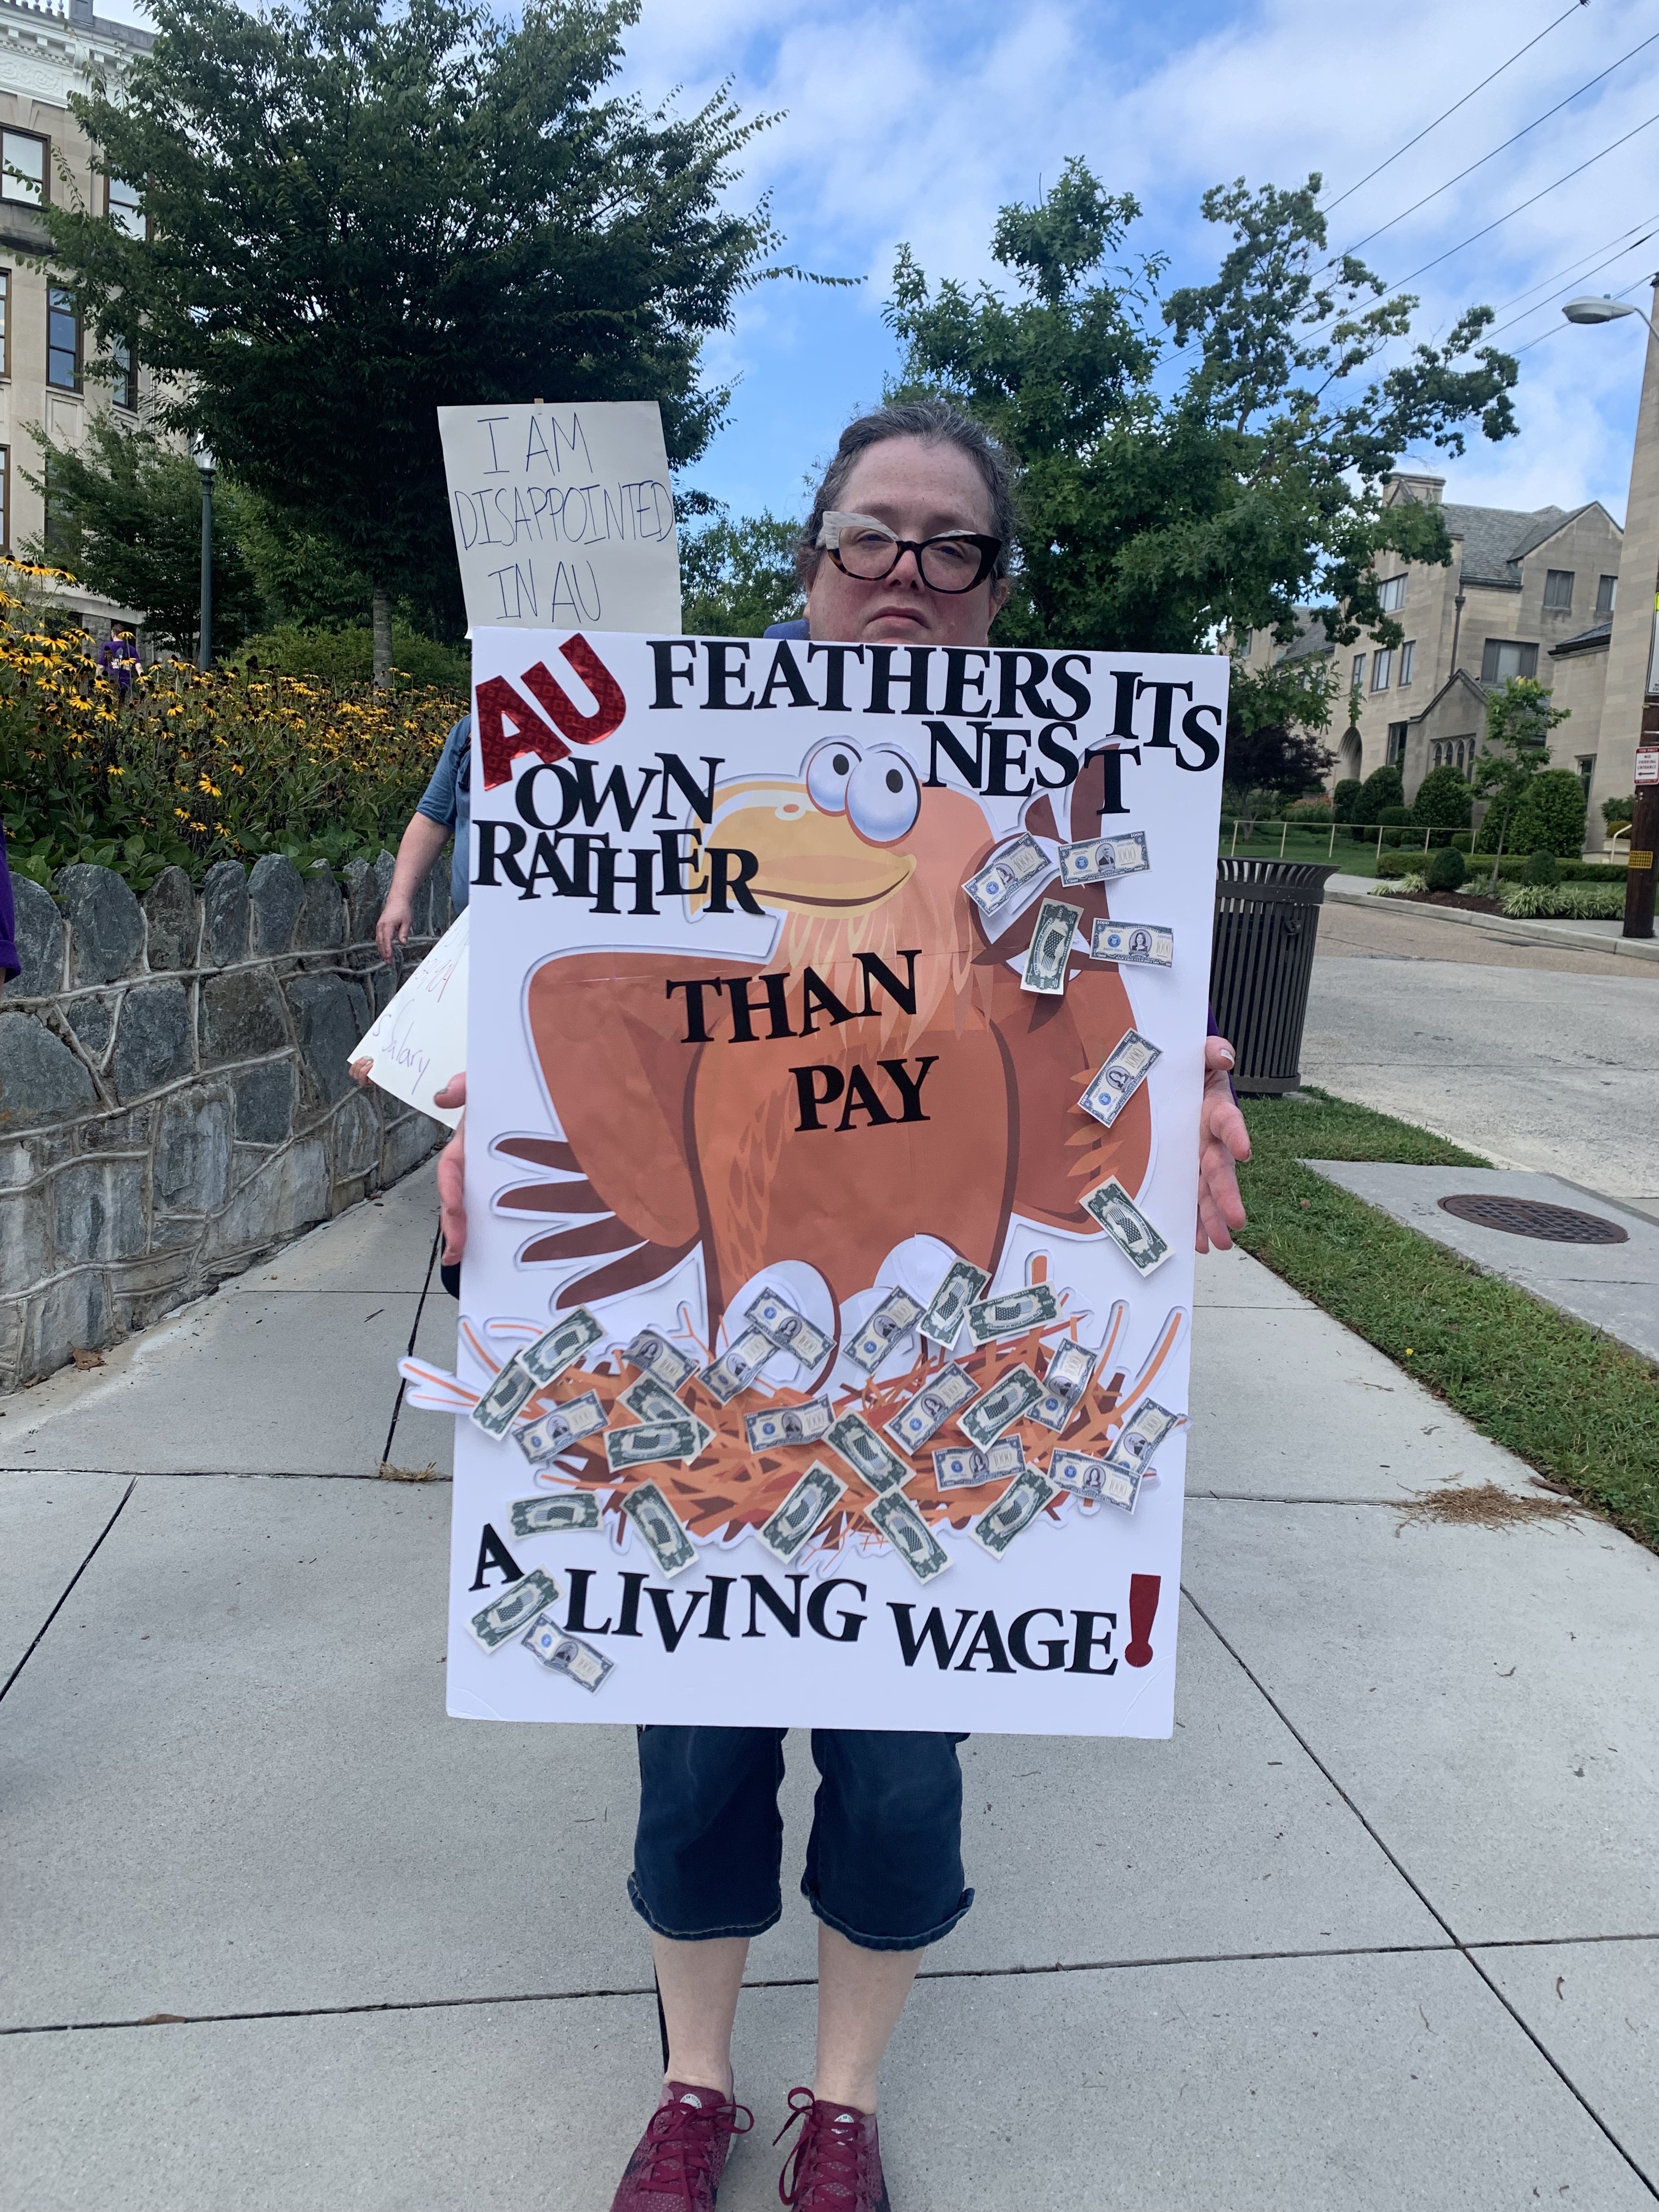 A striking staff member holds a sign that says "AU feathers its own nest rather than pay a living wage!"